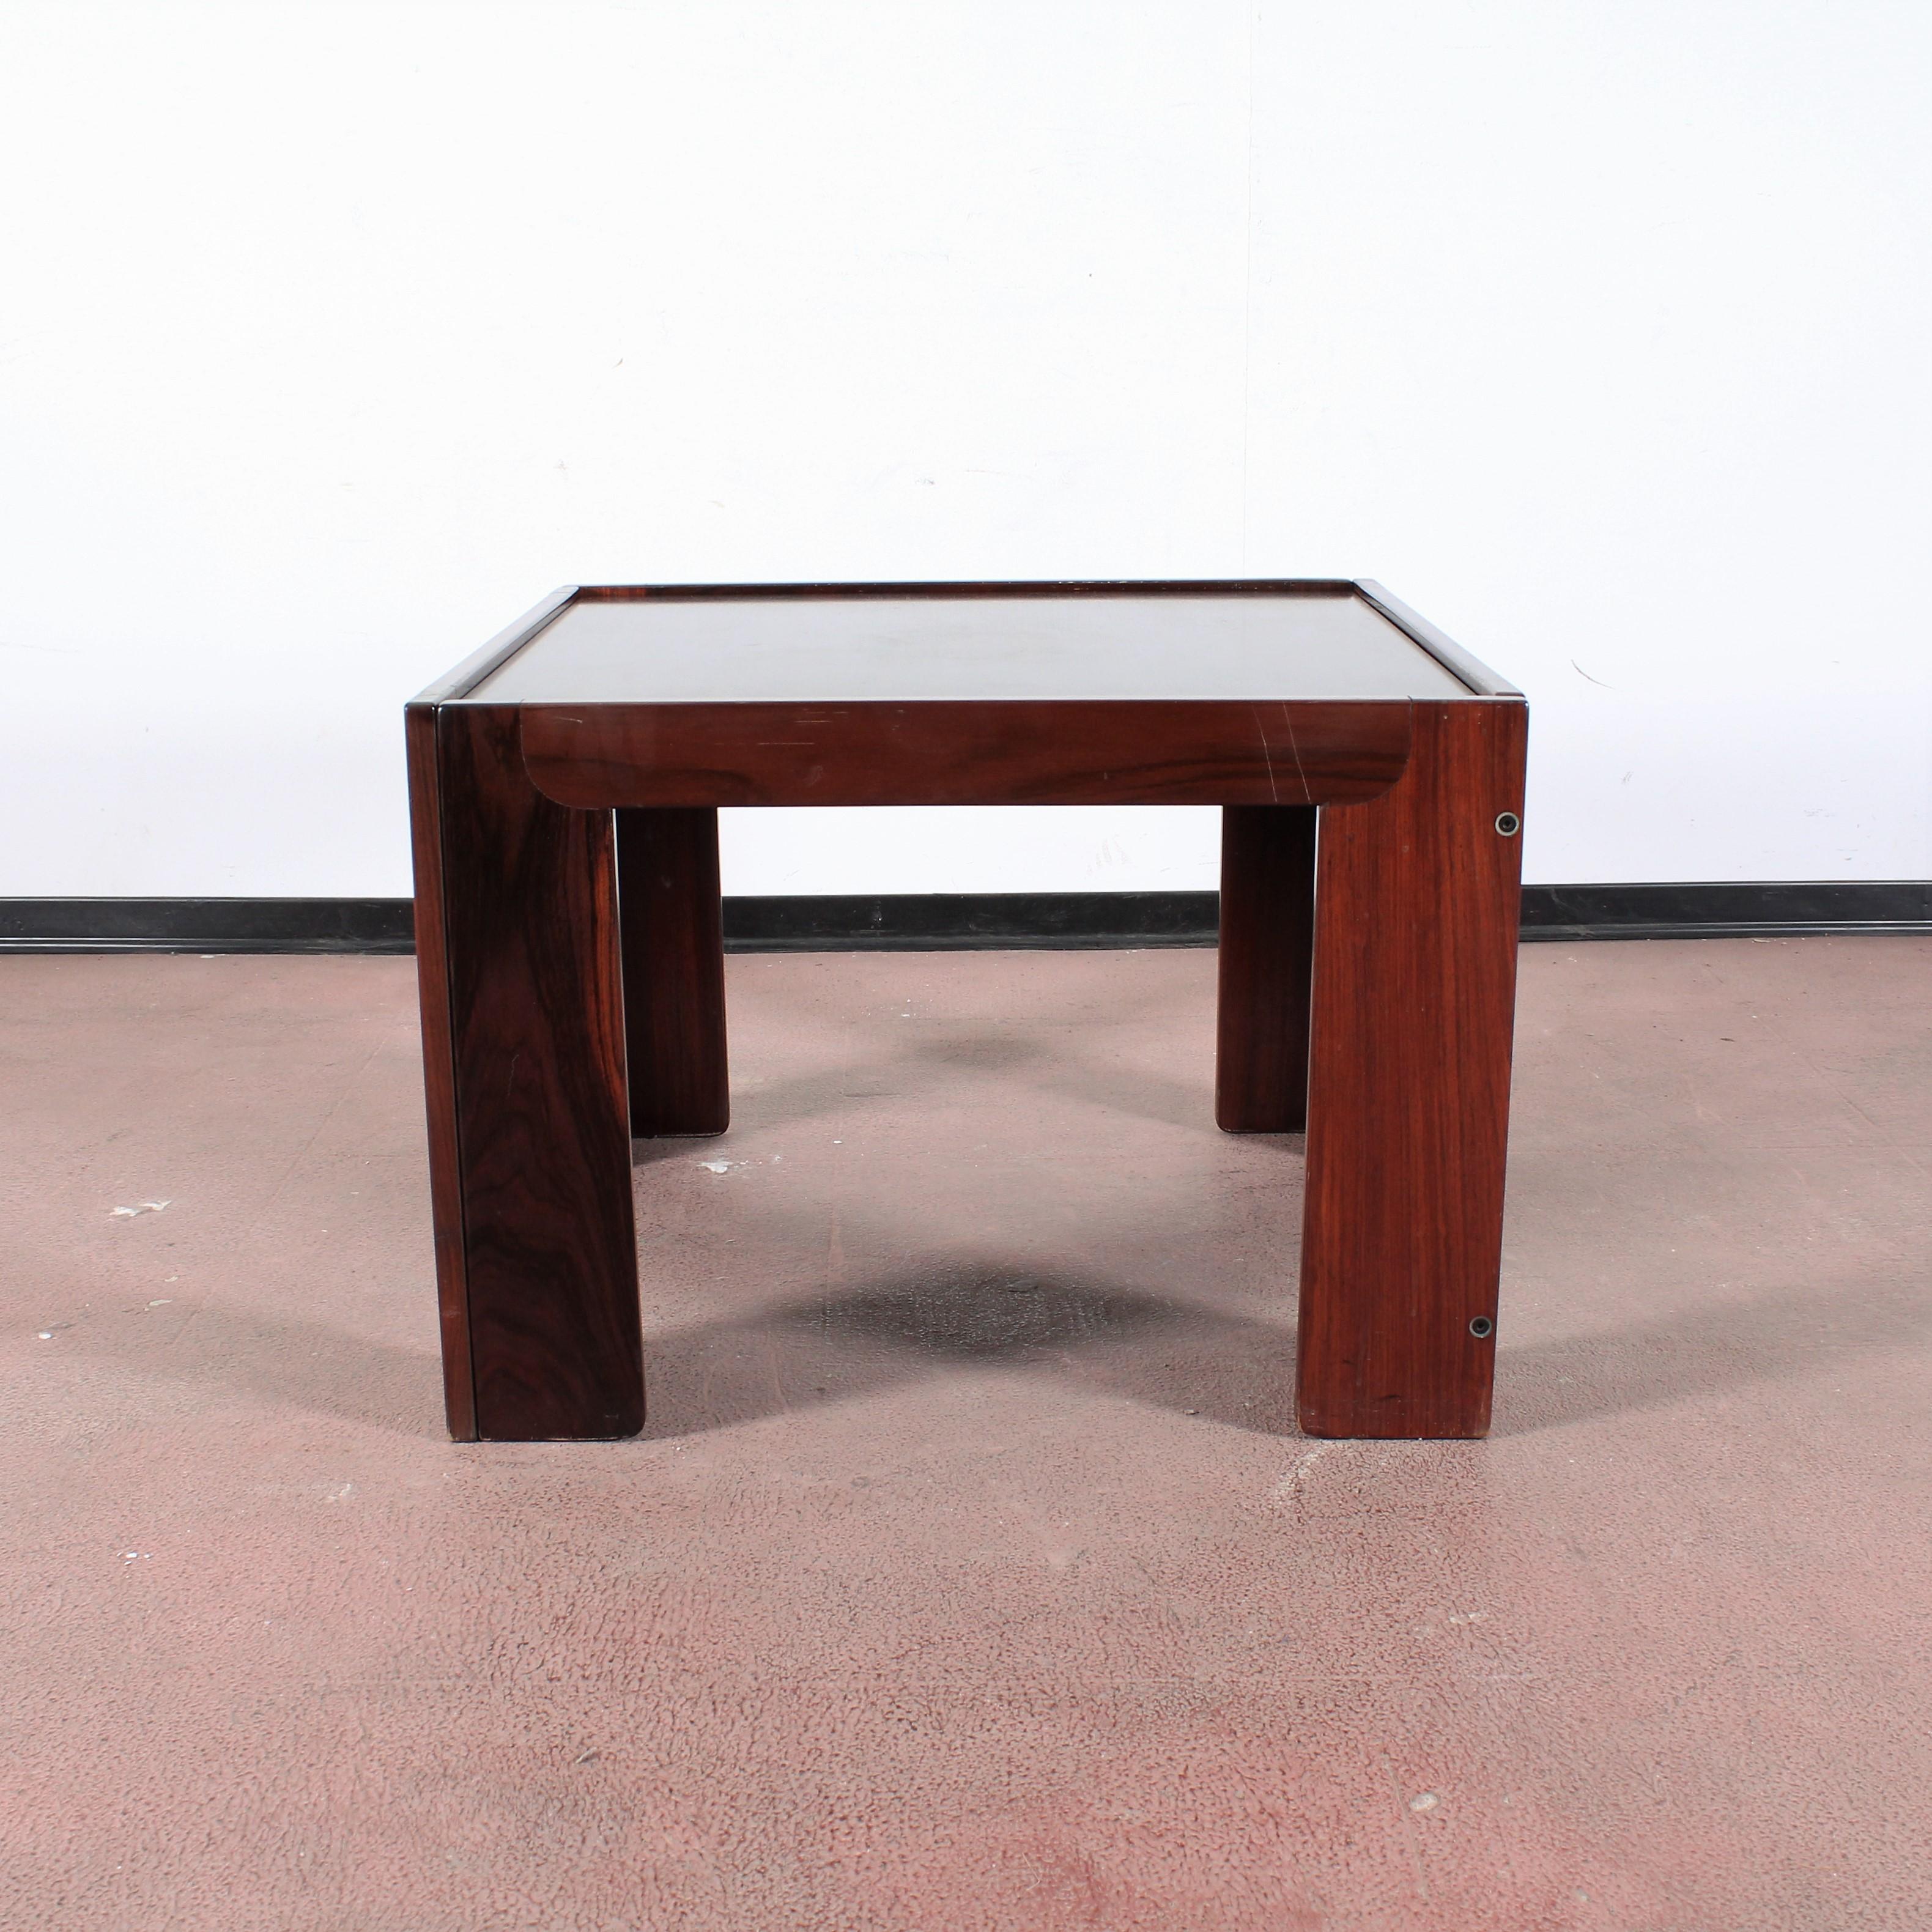 Mid-Century Modern Mid-Century A. & T. Scarpa for Cassina, Meda Wood Coffee Table mod 771 '65 Italy